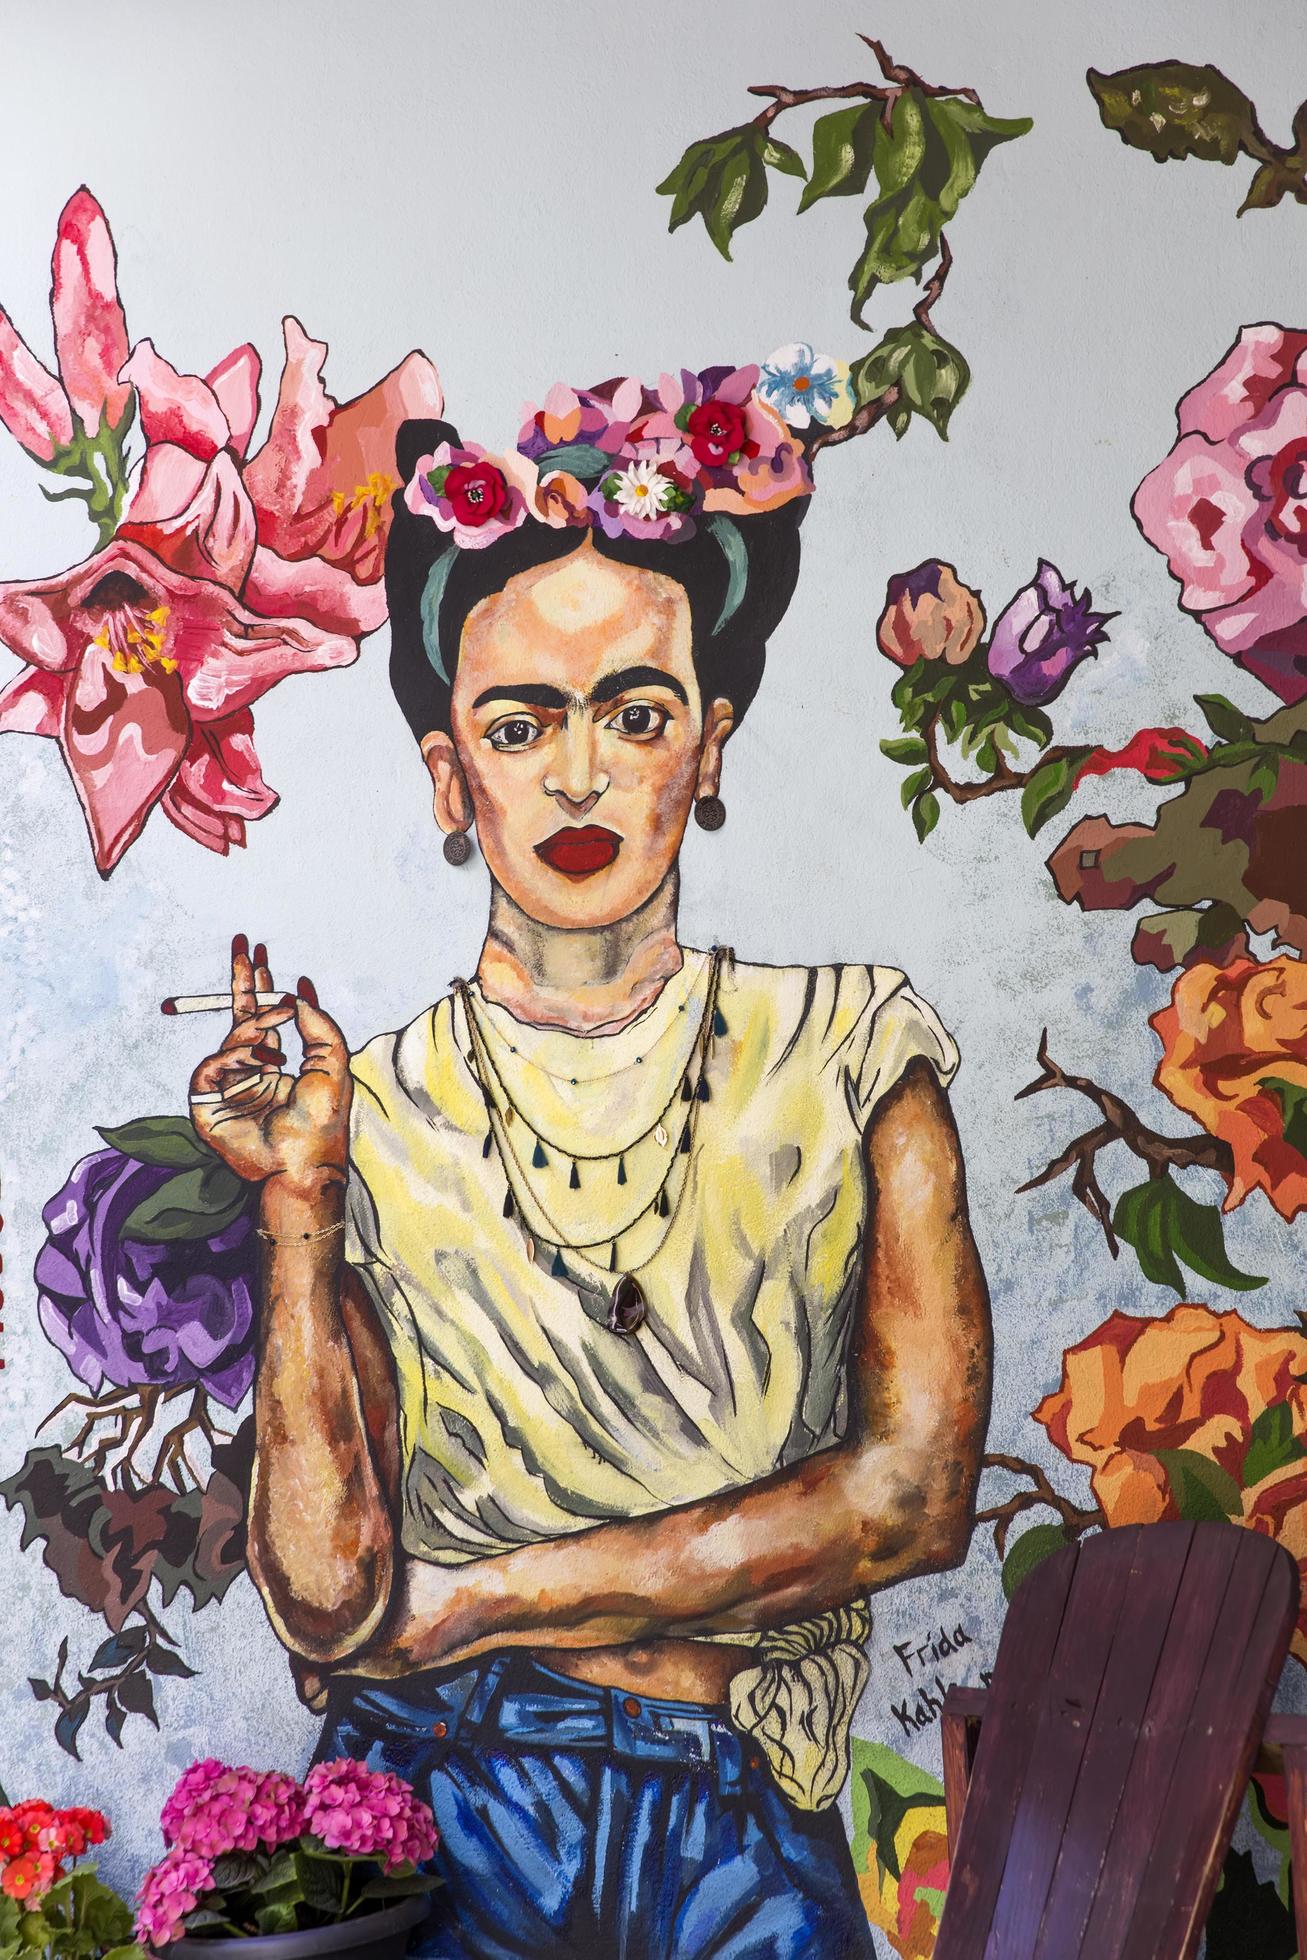 A painting of frida kahlo is on the wall - Frida Kahlo